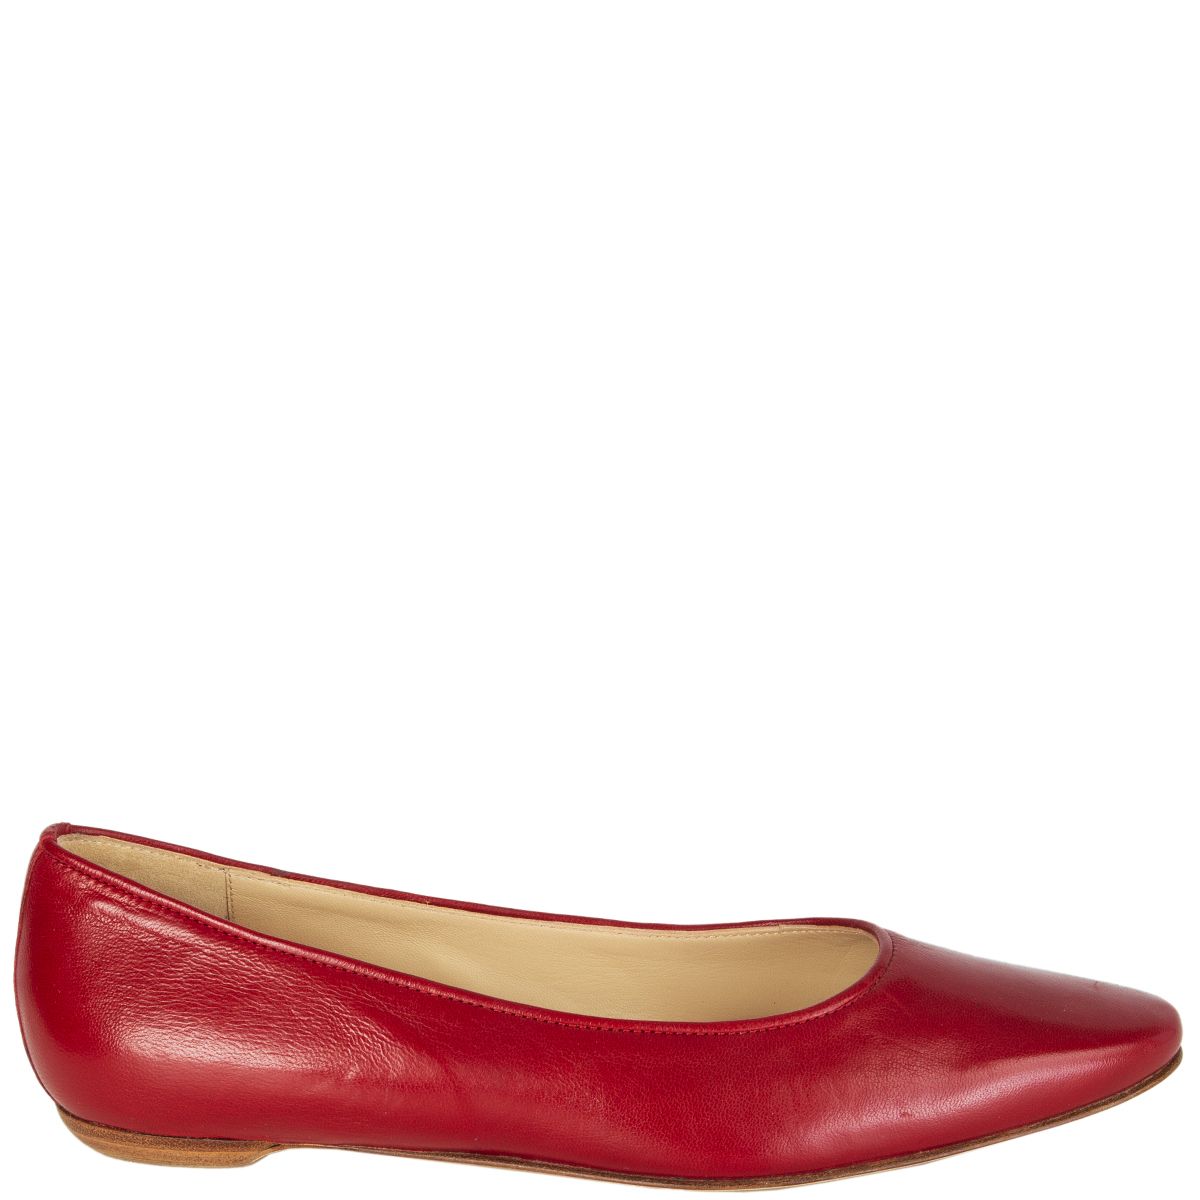 Manolo Blahnik Leather Red Hangisi Heeled Ballerinas Shoes Womens Shoes Flats and flat shoes Ballet flats and ballerina shoes 